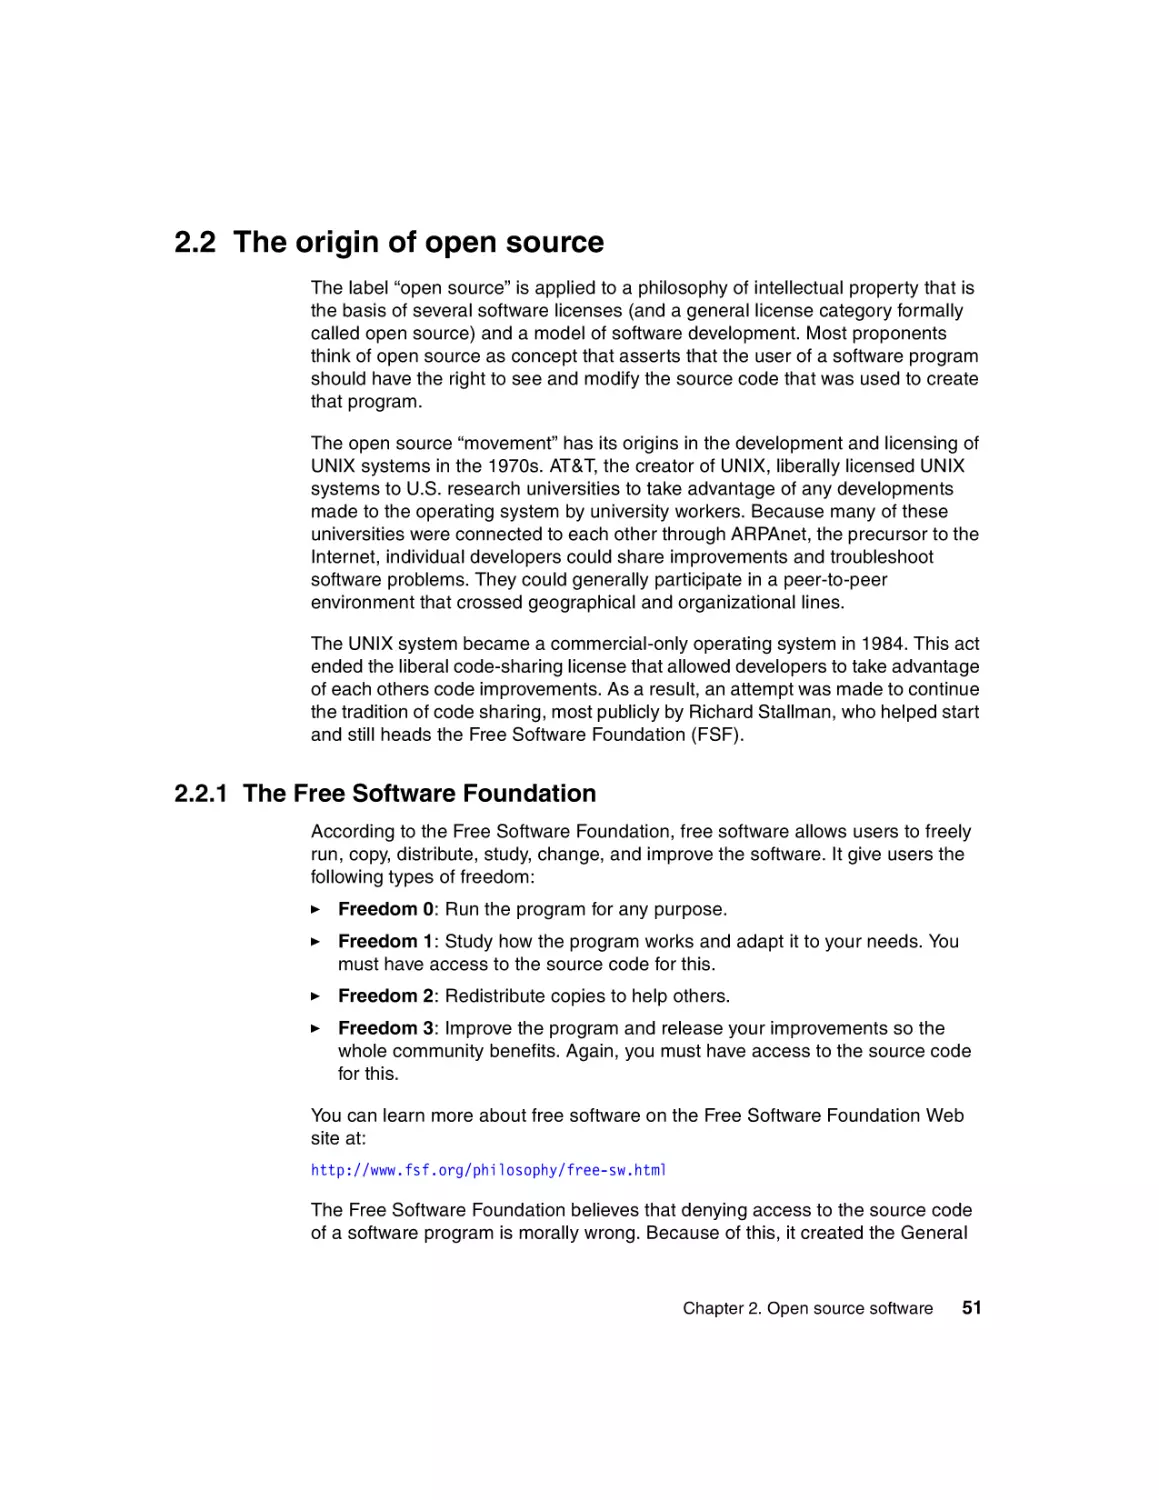 2.2 The origin of open source
2.2.1 The Free Software Foundation